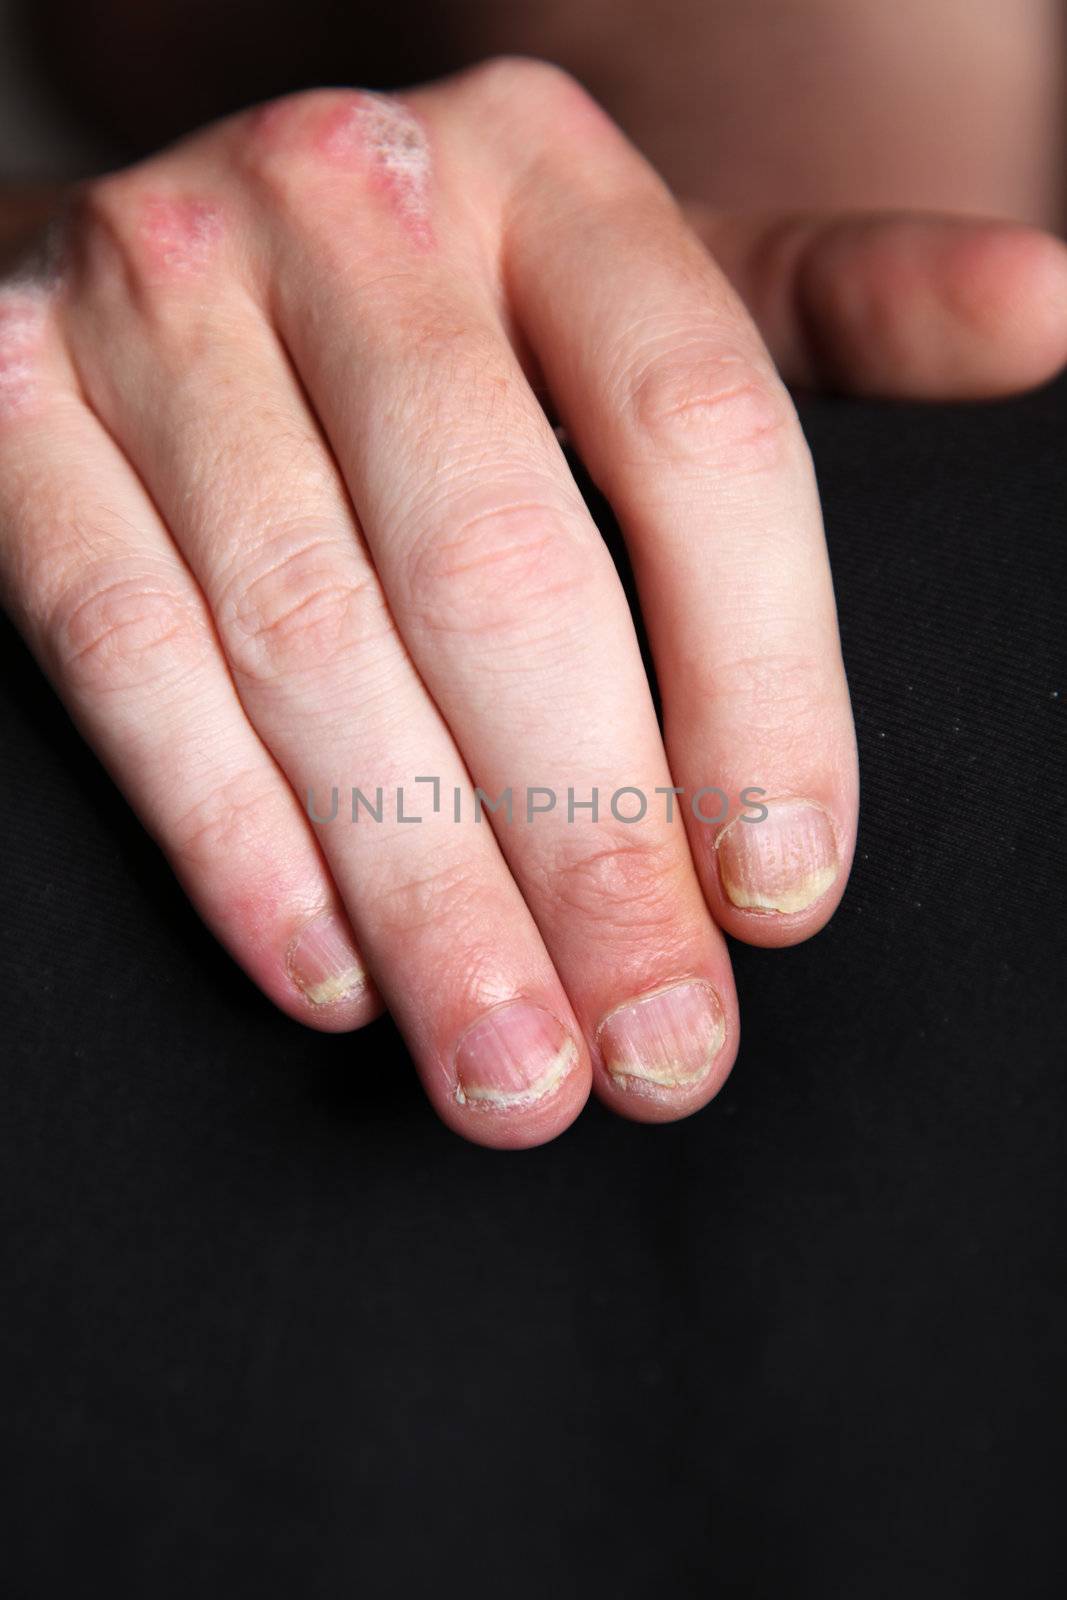 psoriasis of the fingernails u.hand by Farina6000